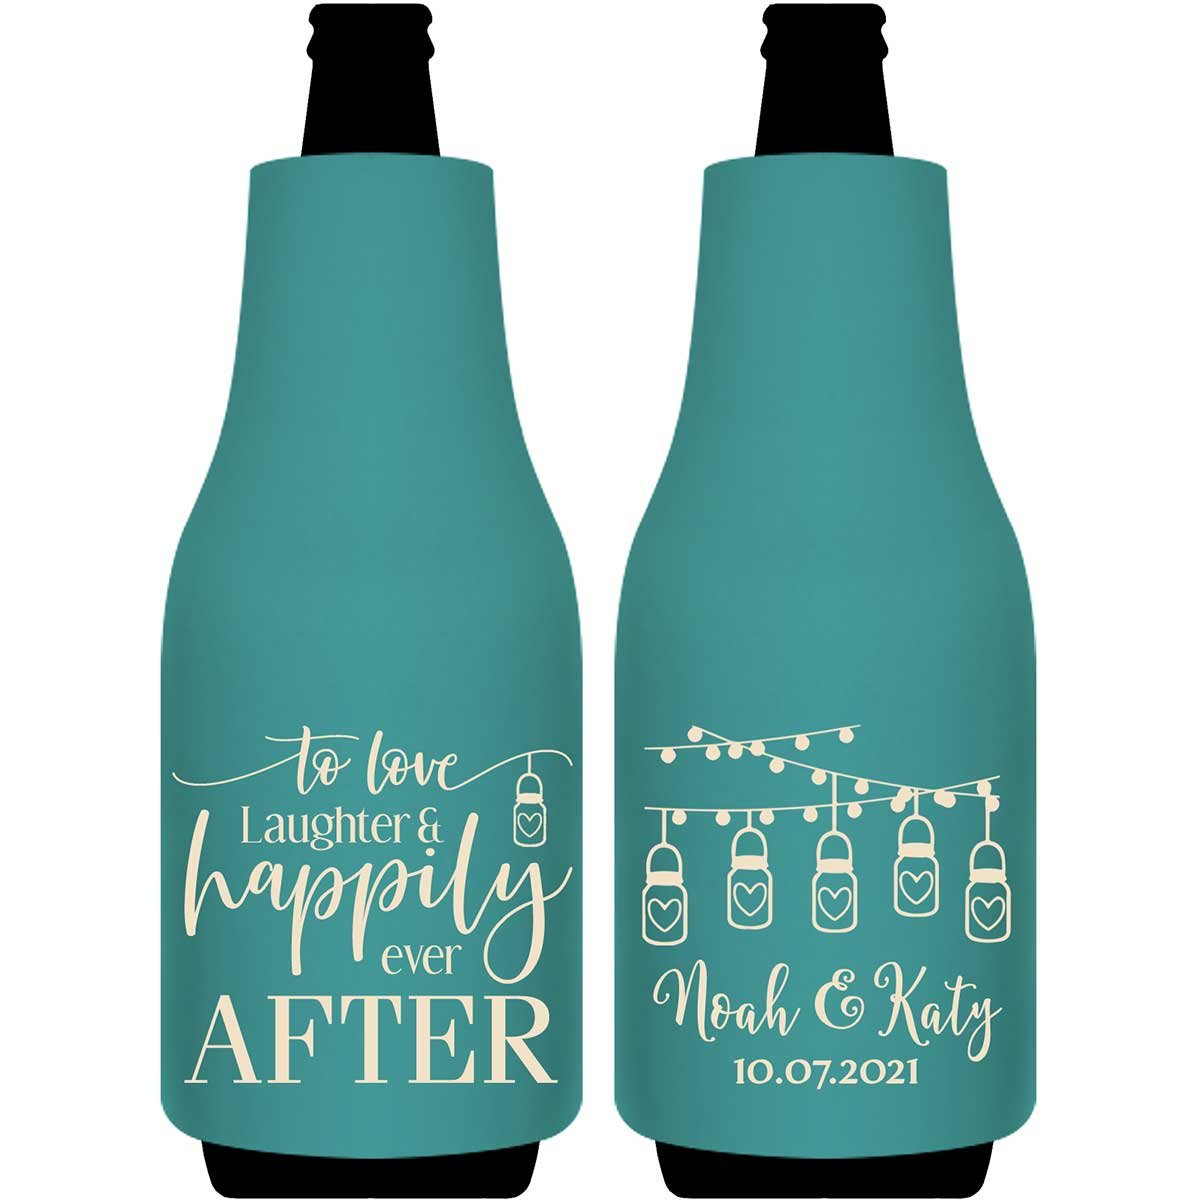 To Love Laughter & Happily Ever After 4A Foldable Bottle Sleeve Koozies Wedding Gifts for Guests